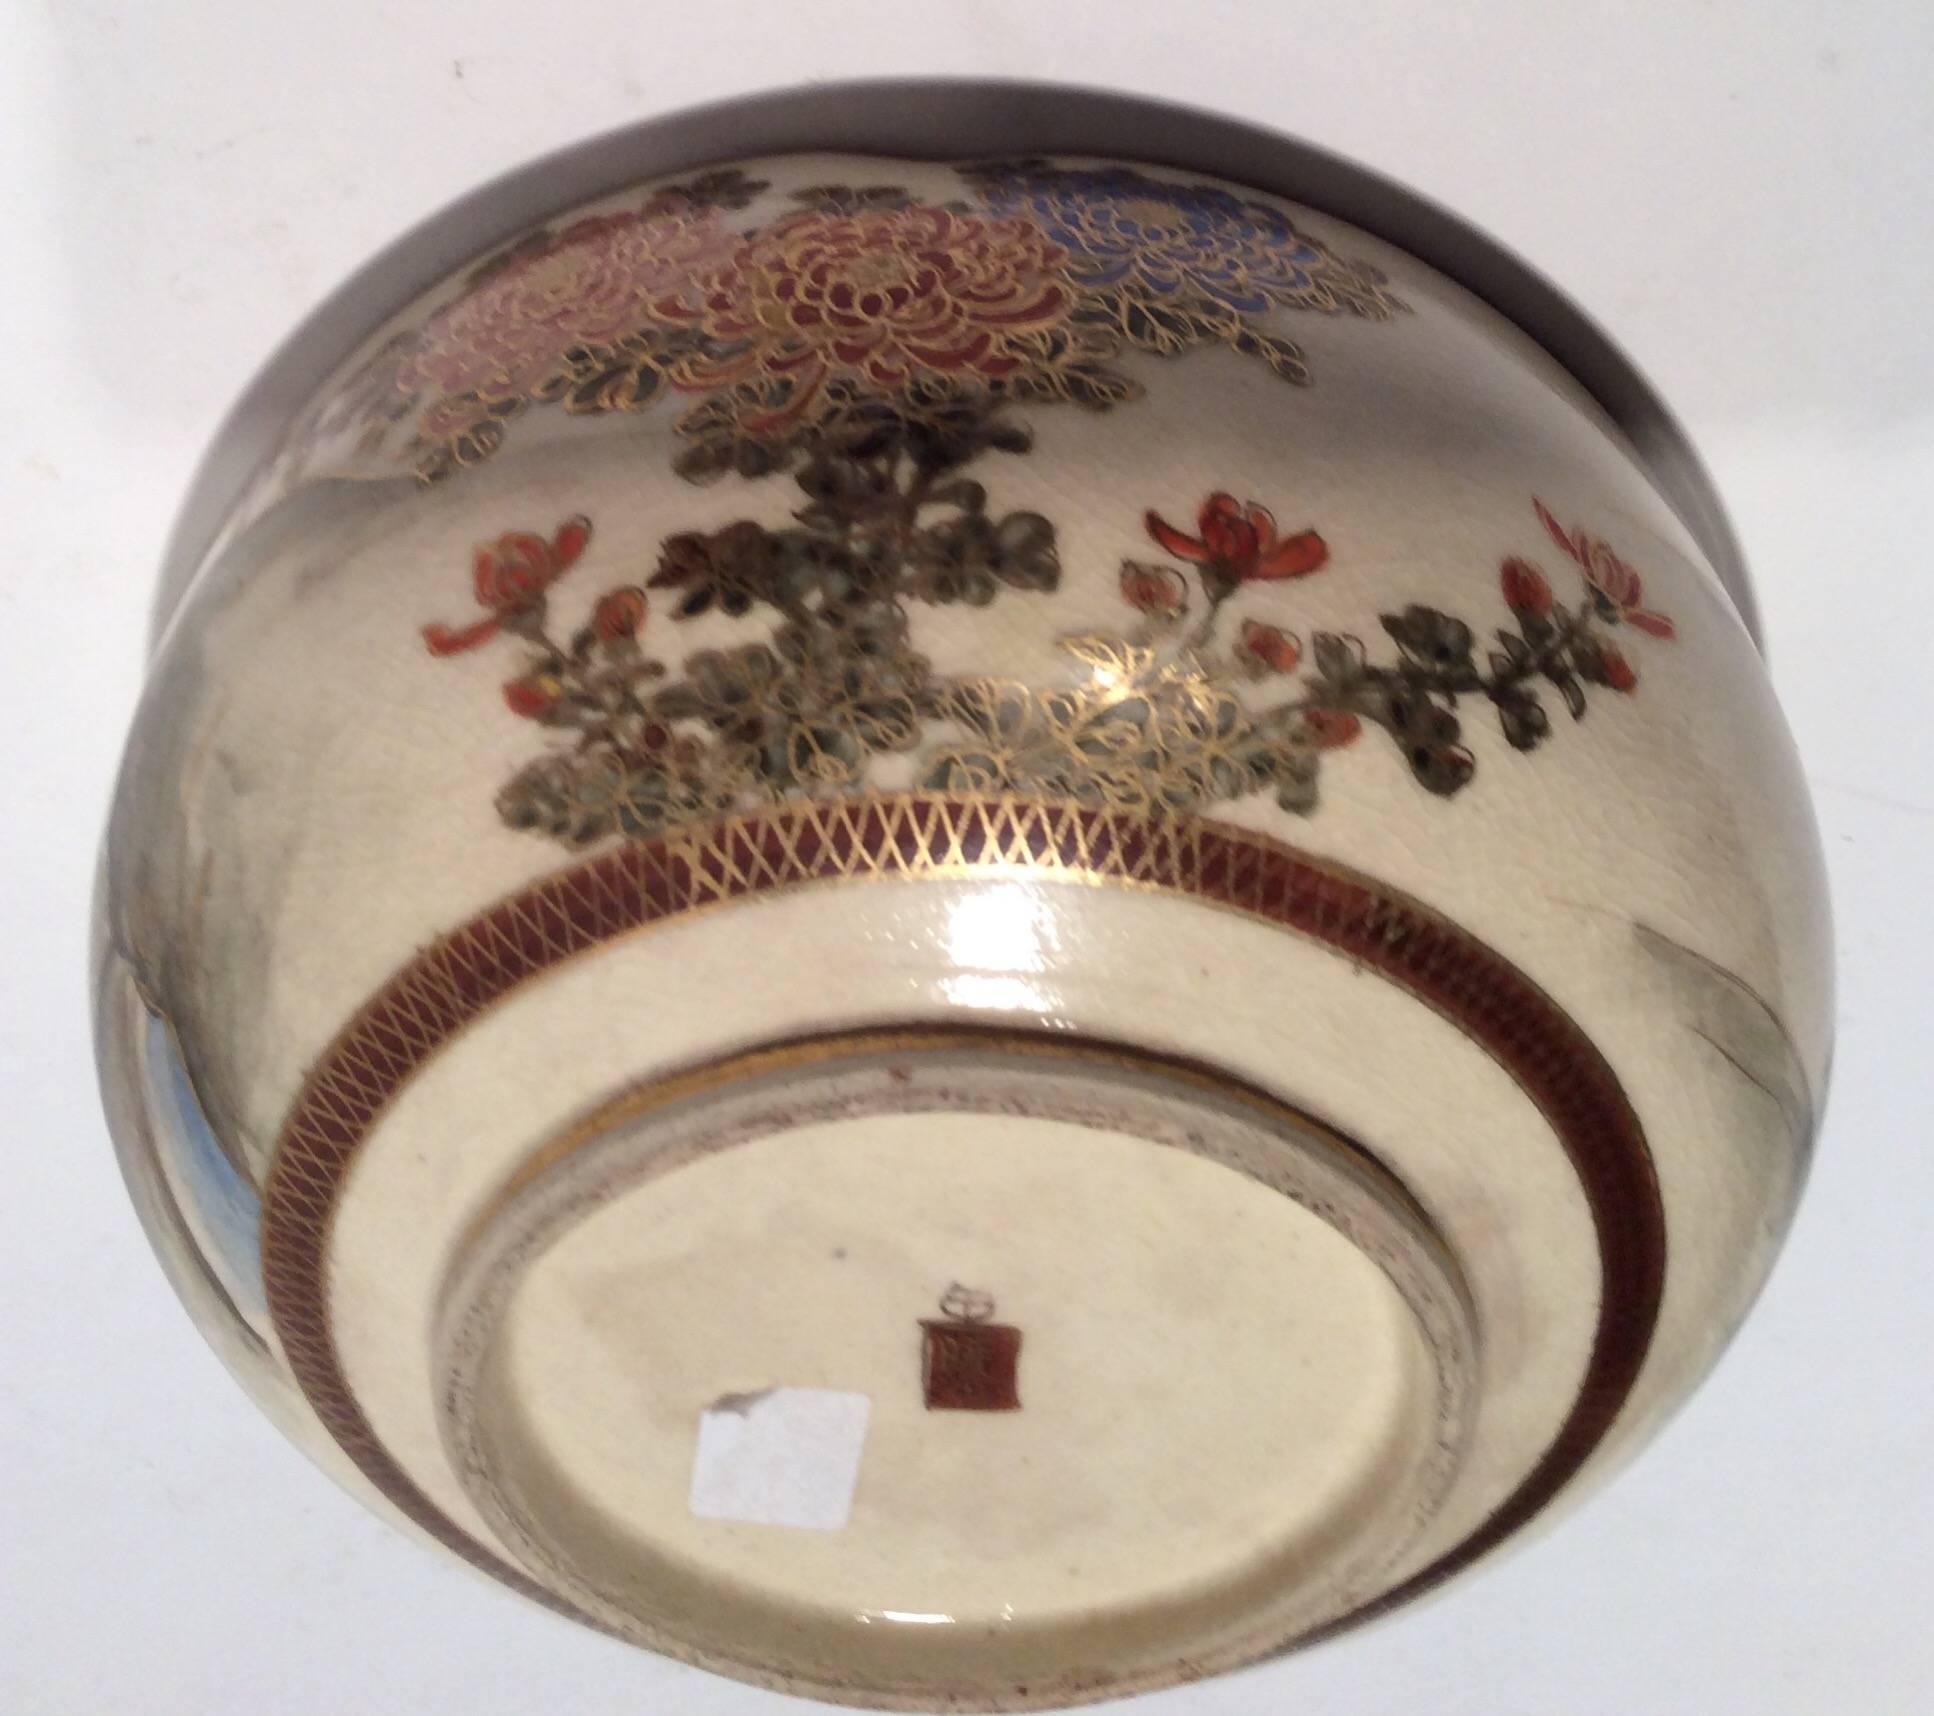 From the estate of an illustrious American General. 
This fine example of Satsuma Porcelain is decorated with draped wisteria over a pictorial scene of a bridge over water and he gentle sloped roofs of classical buildings.
The outer rim is